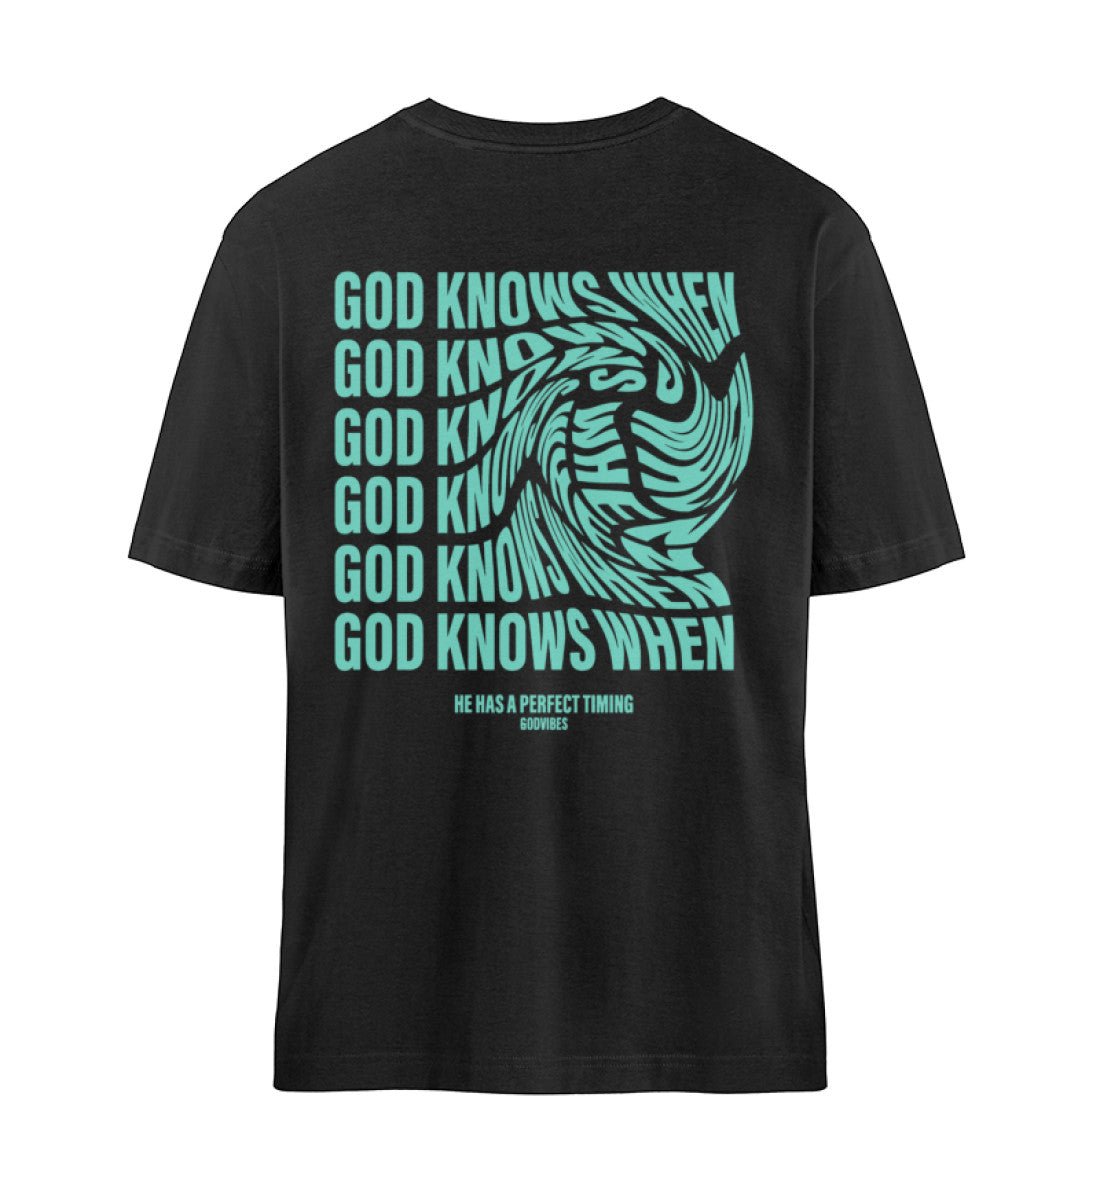 'GOD KNOWS WHEN' OVERSIZED TEE - GODVIBES